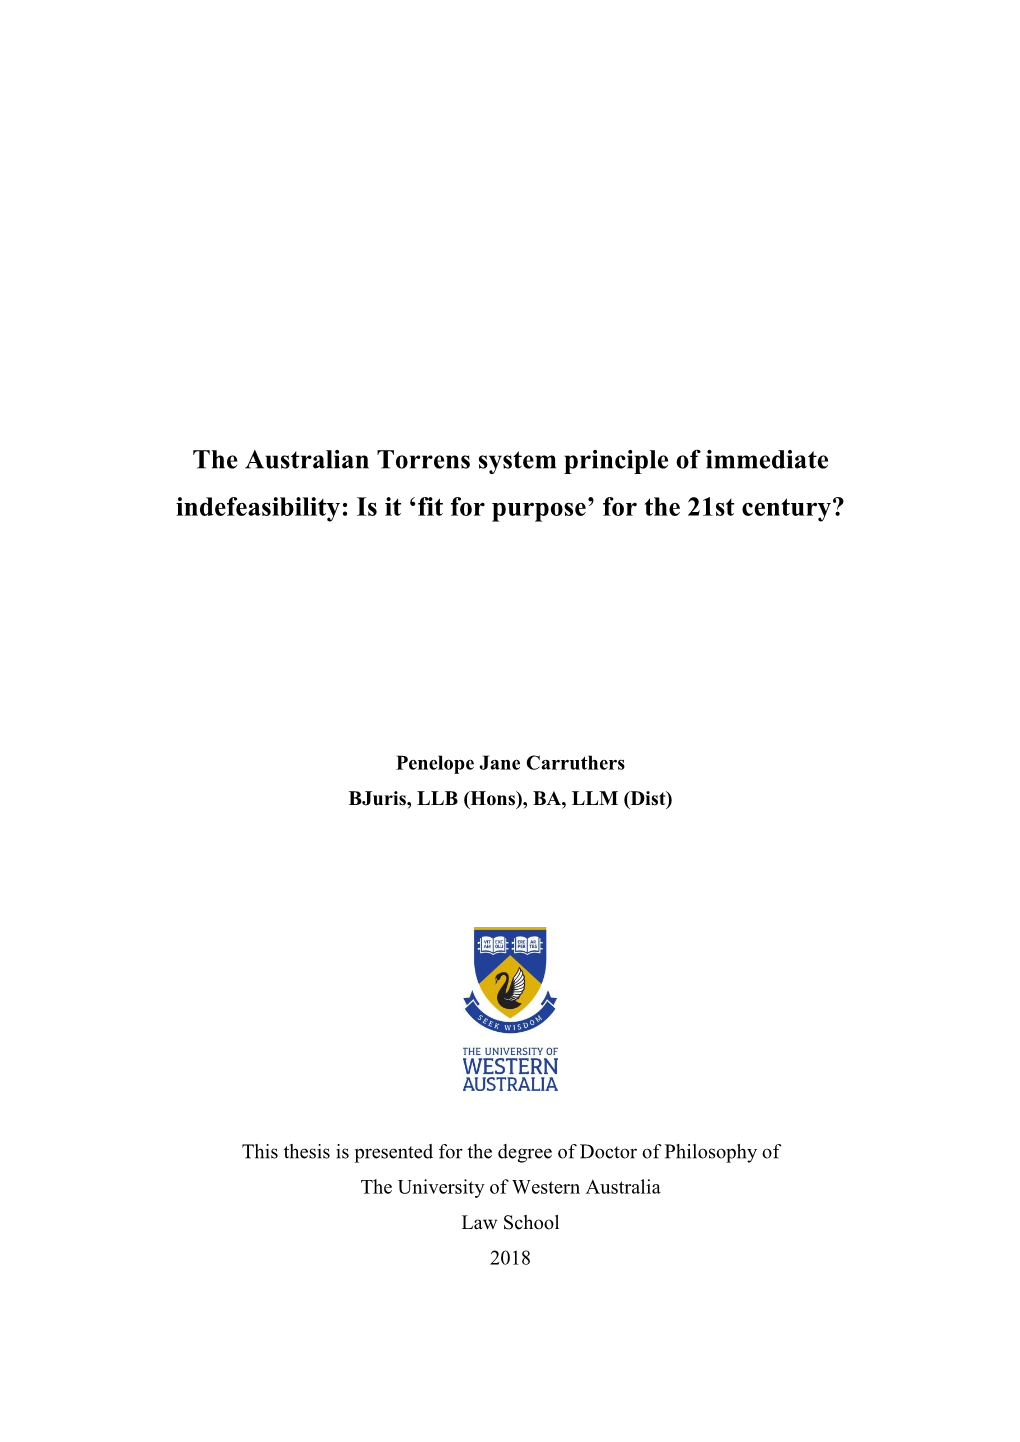 The Australian Torrens System Principle of Immediate Indefeasibility: Is It 'Fit for Purpose' for the 21St Century?